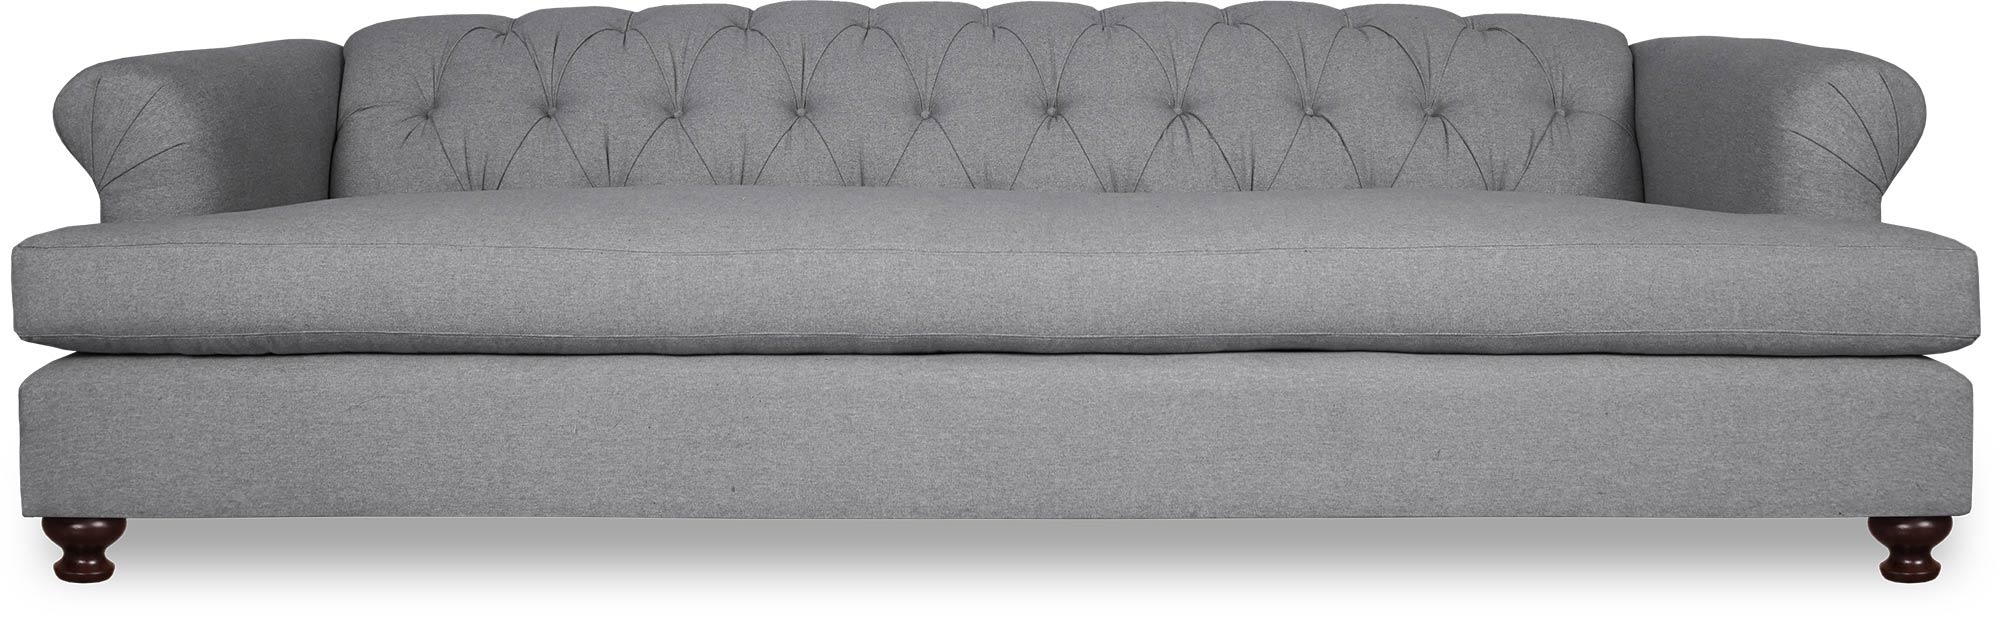 102 Poodles sofa in Greenwich Chrome stain-proof fabric